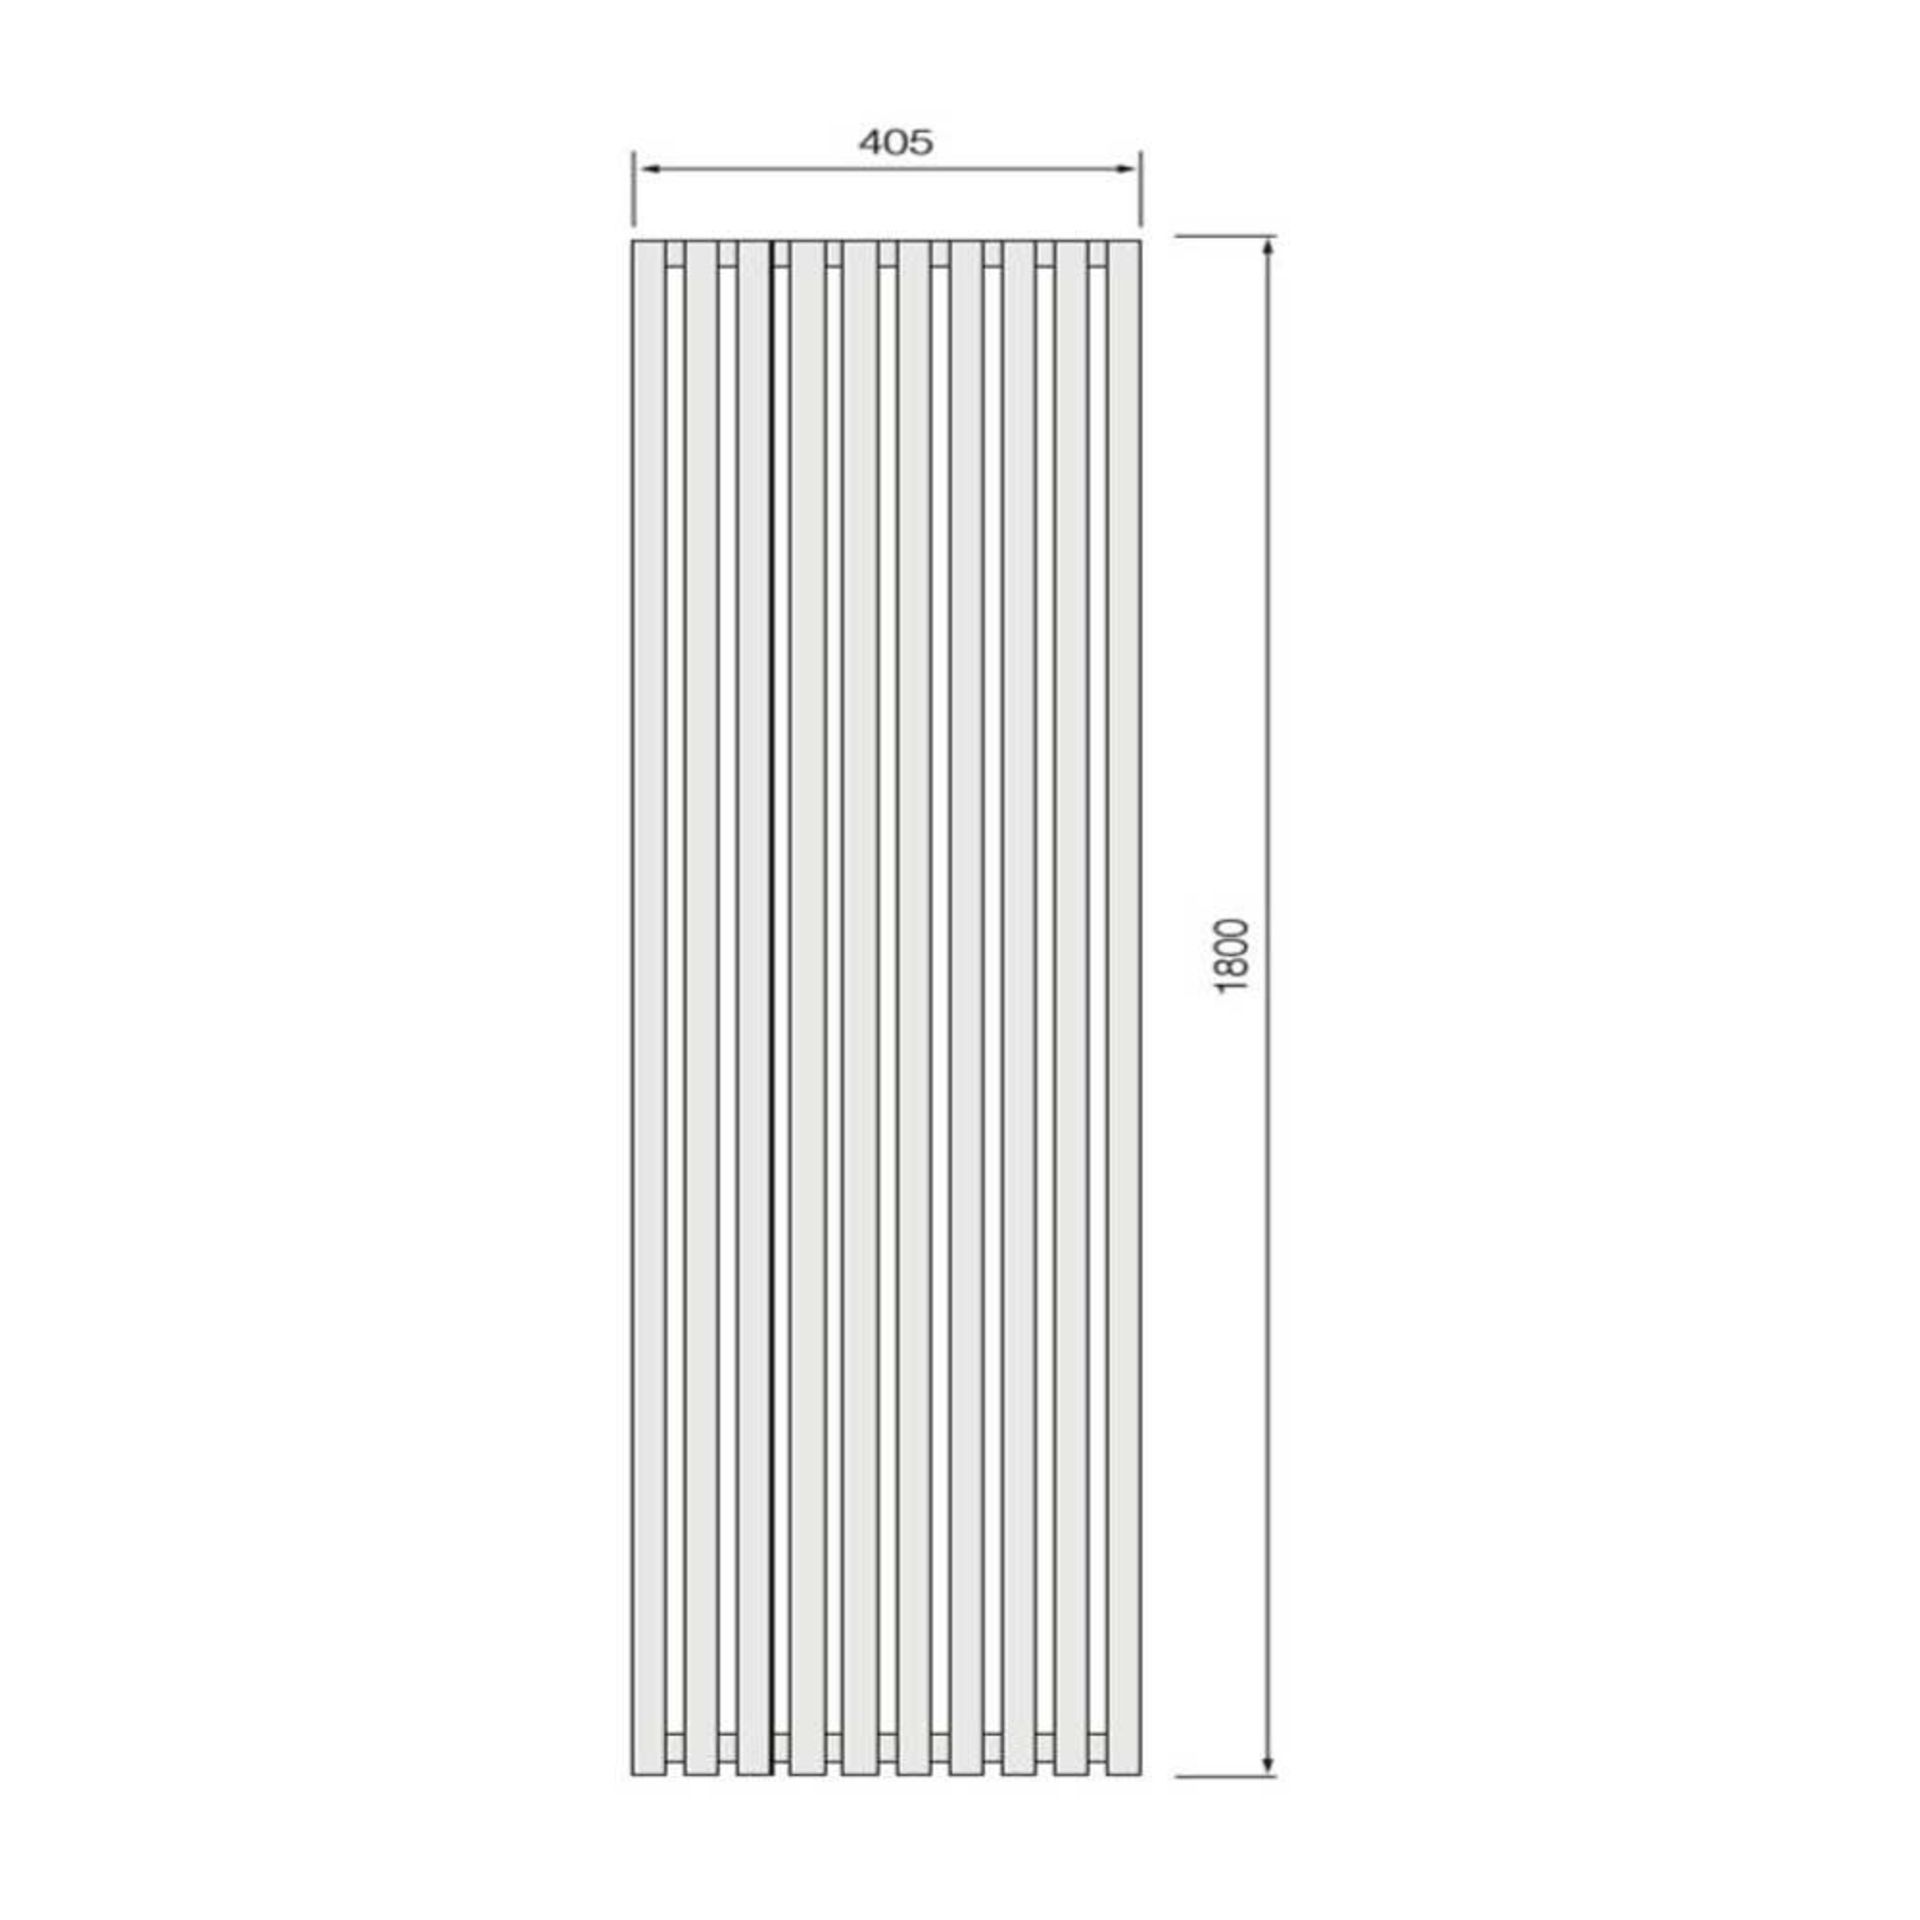 1 x Warmbase Kintonic 405x1800mm Contemporary Chrome Vertical Radiator - New Boxed Stock - RRP £410 - Image 3 of 3